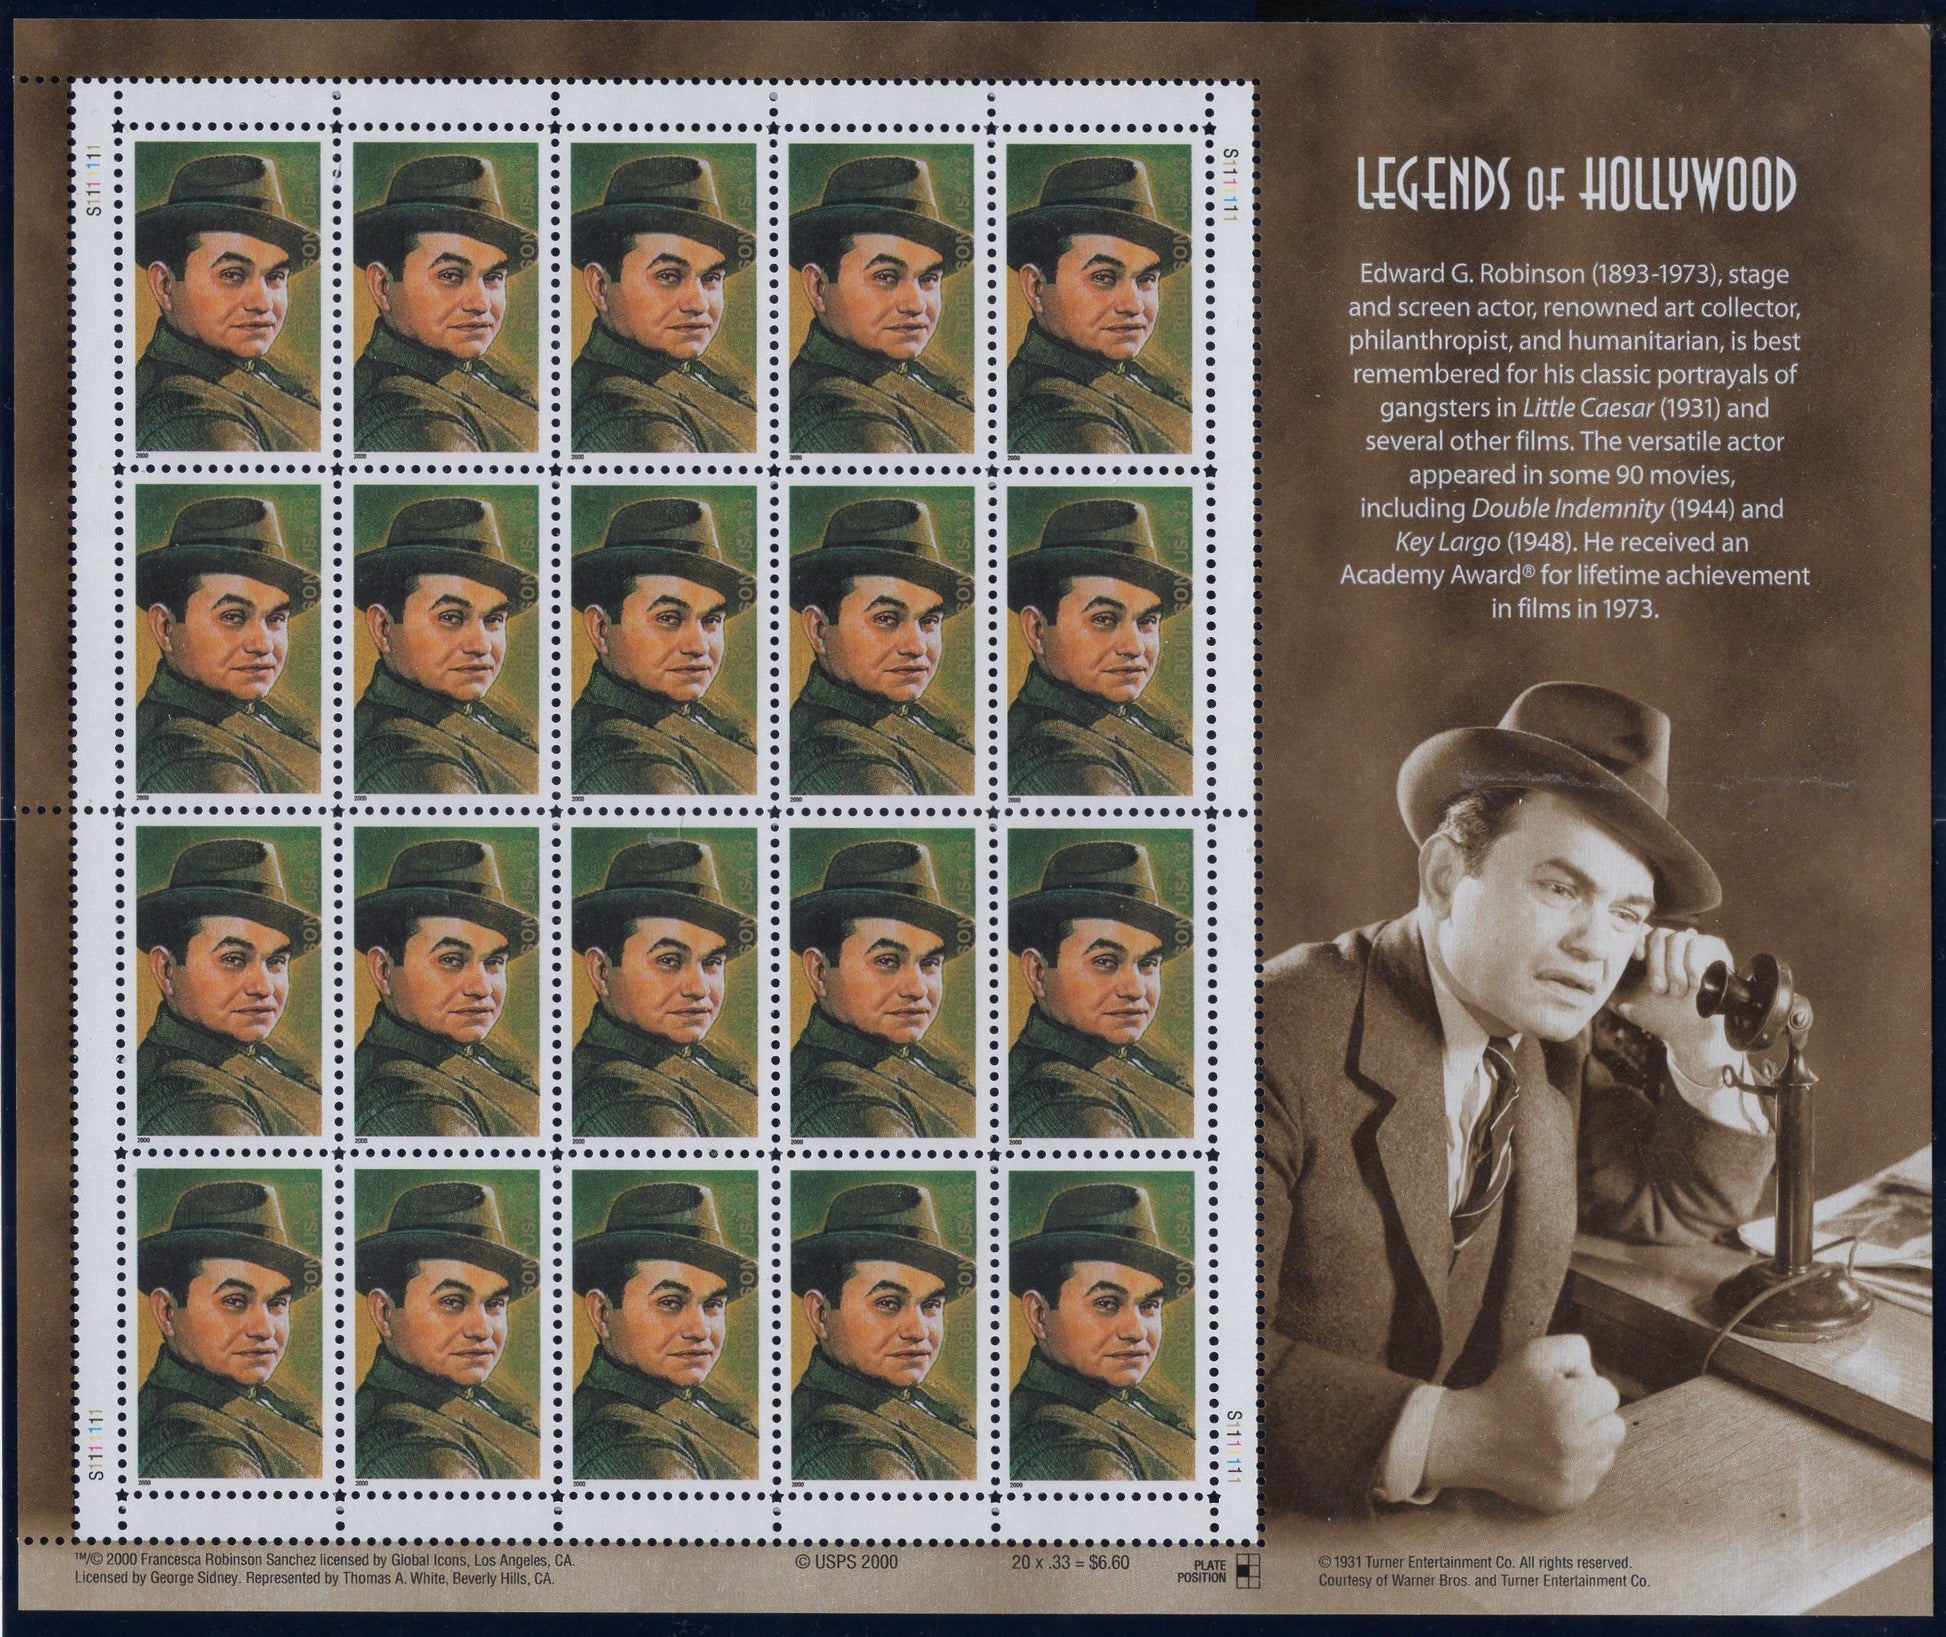 EDWARD G. ROBINSON LEGENDARY ACTOR SPECIAL DECORATIVE SHEET of 20 Stamps - A Great Gift